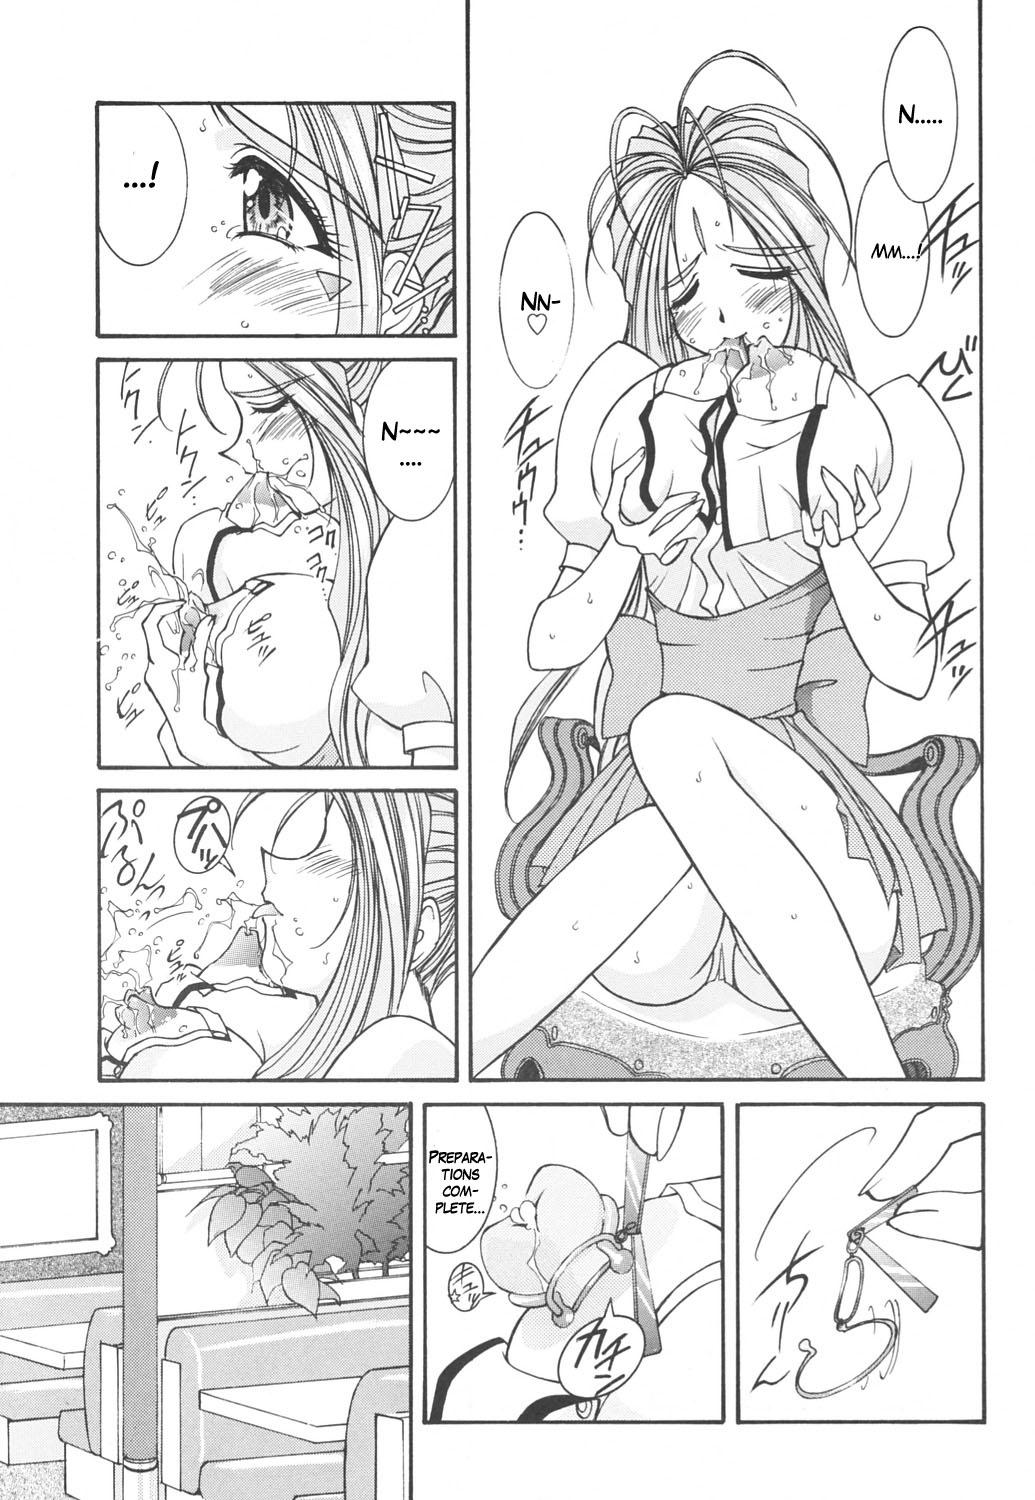 Slut Prison Rouge - Ah my goddess Family Roleplay - Page 10